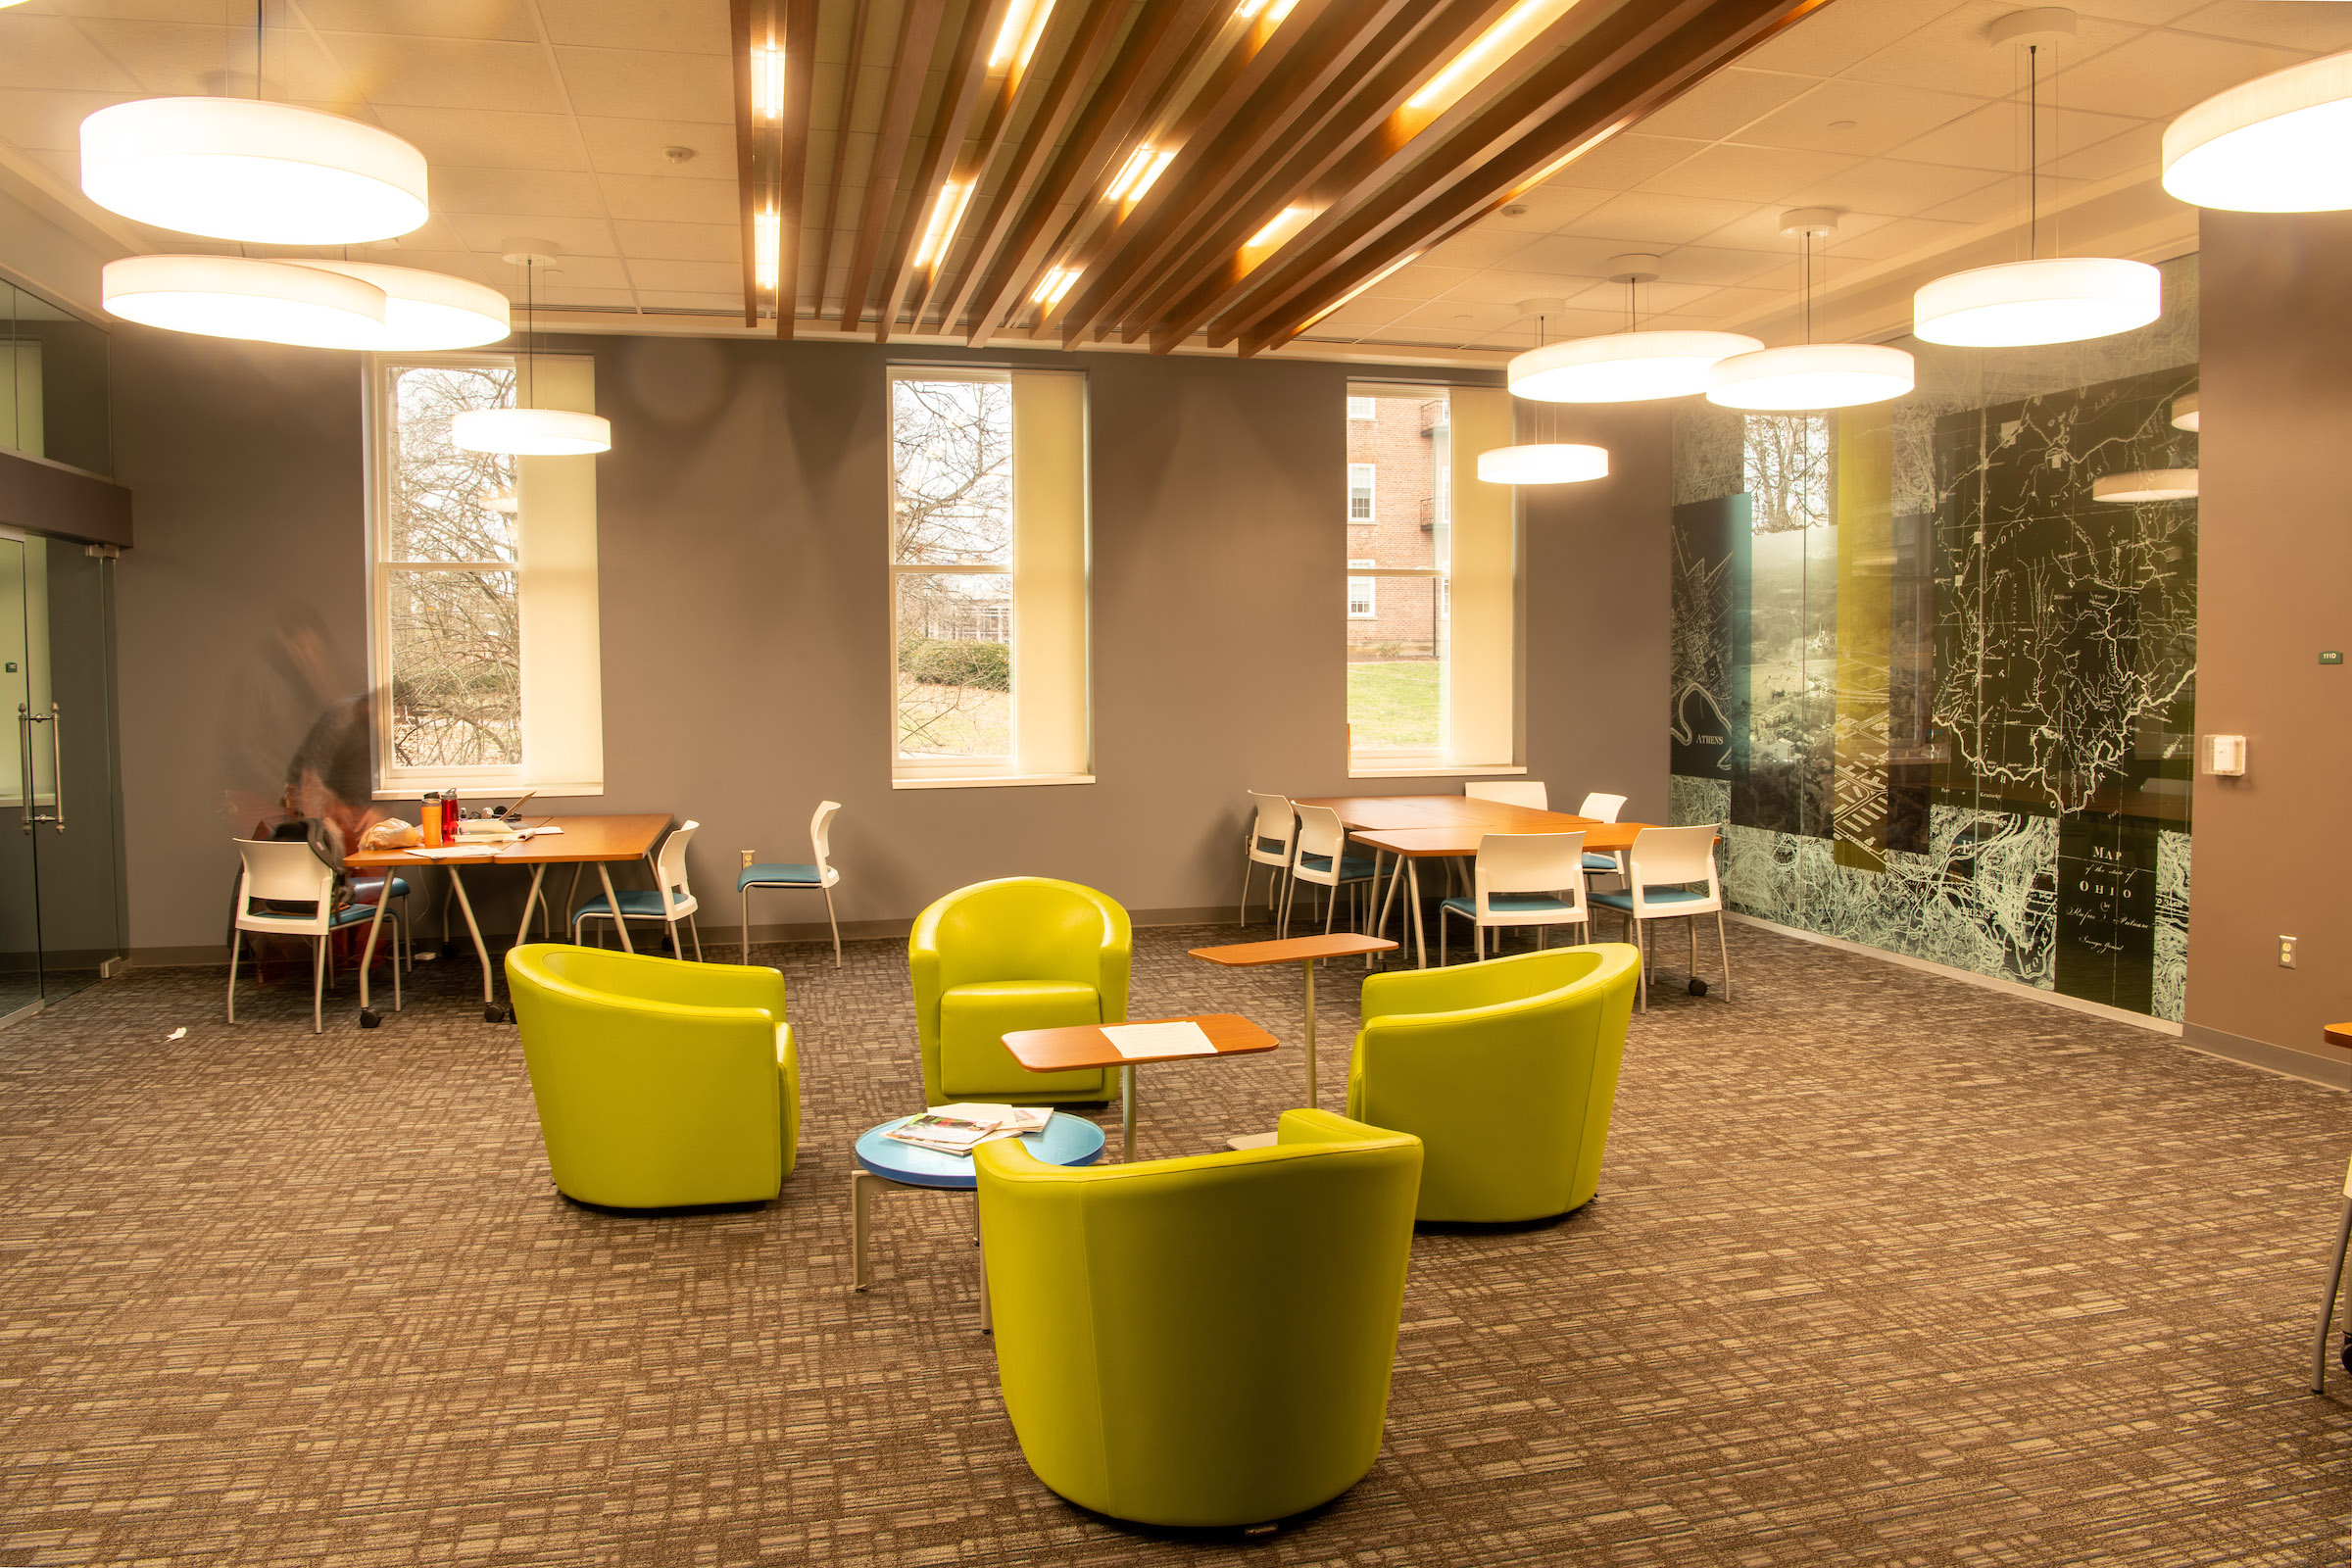 A collaborative space in Ellis Hall after the renovation.